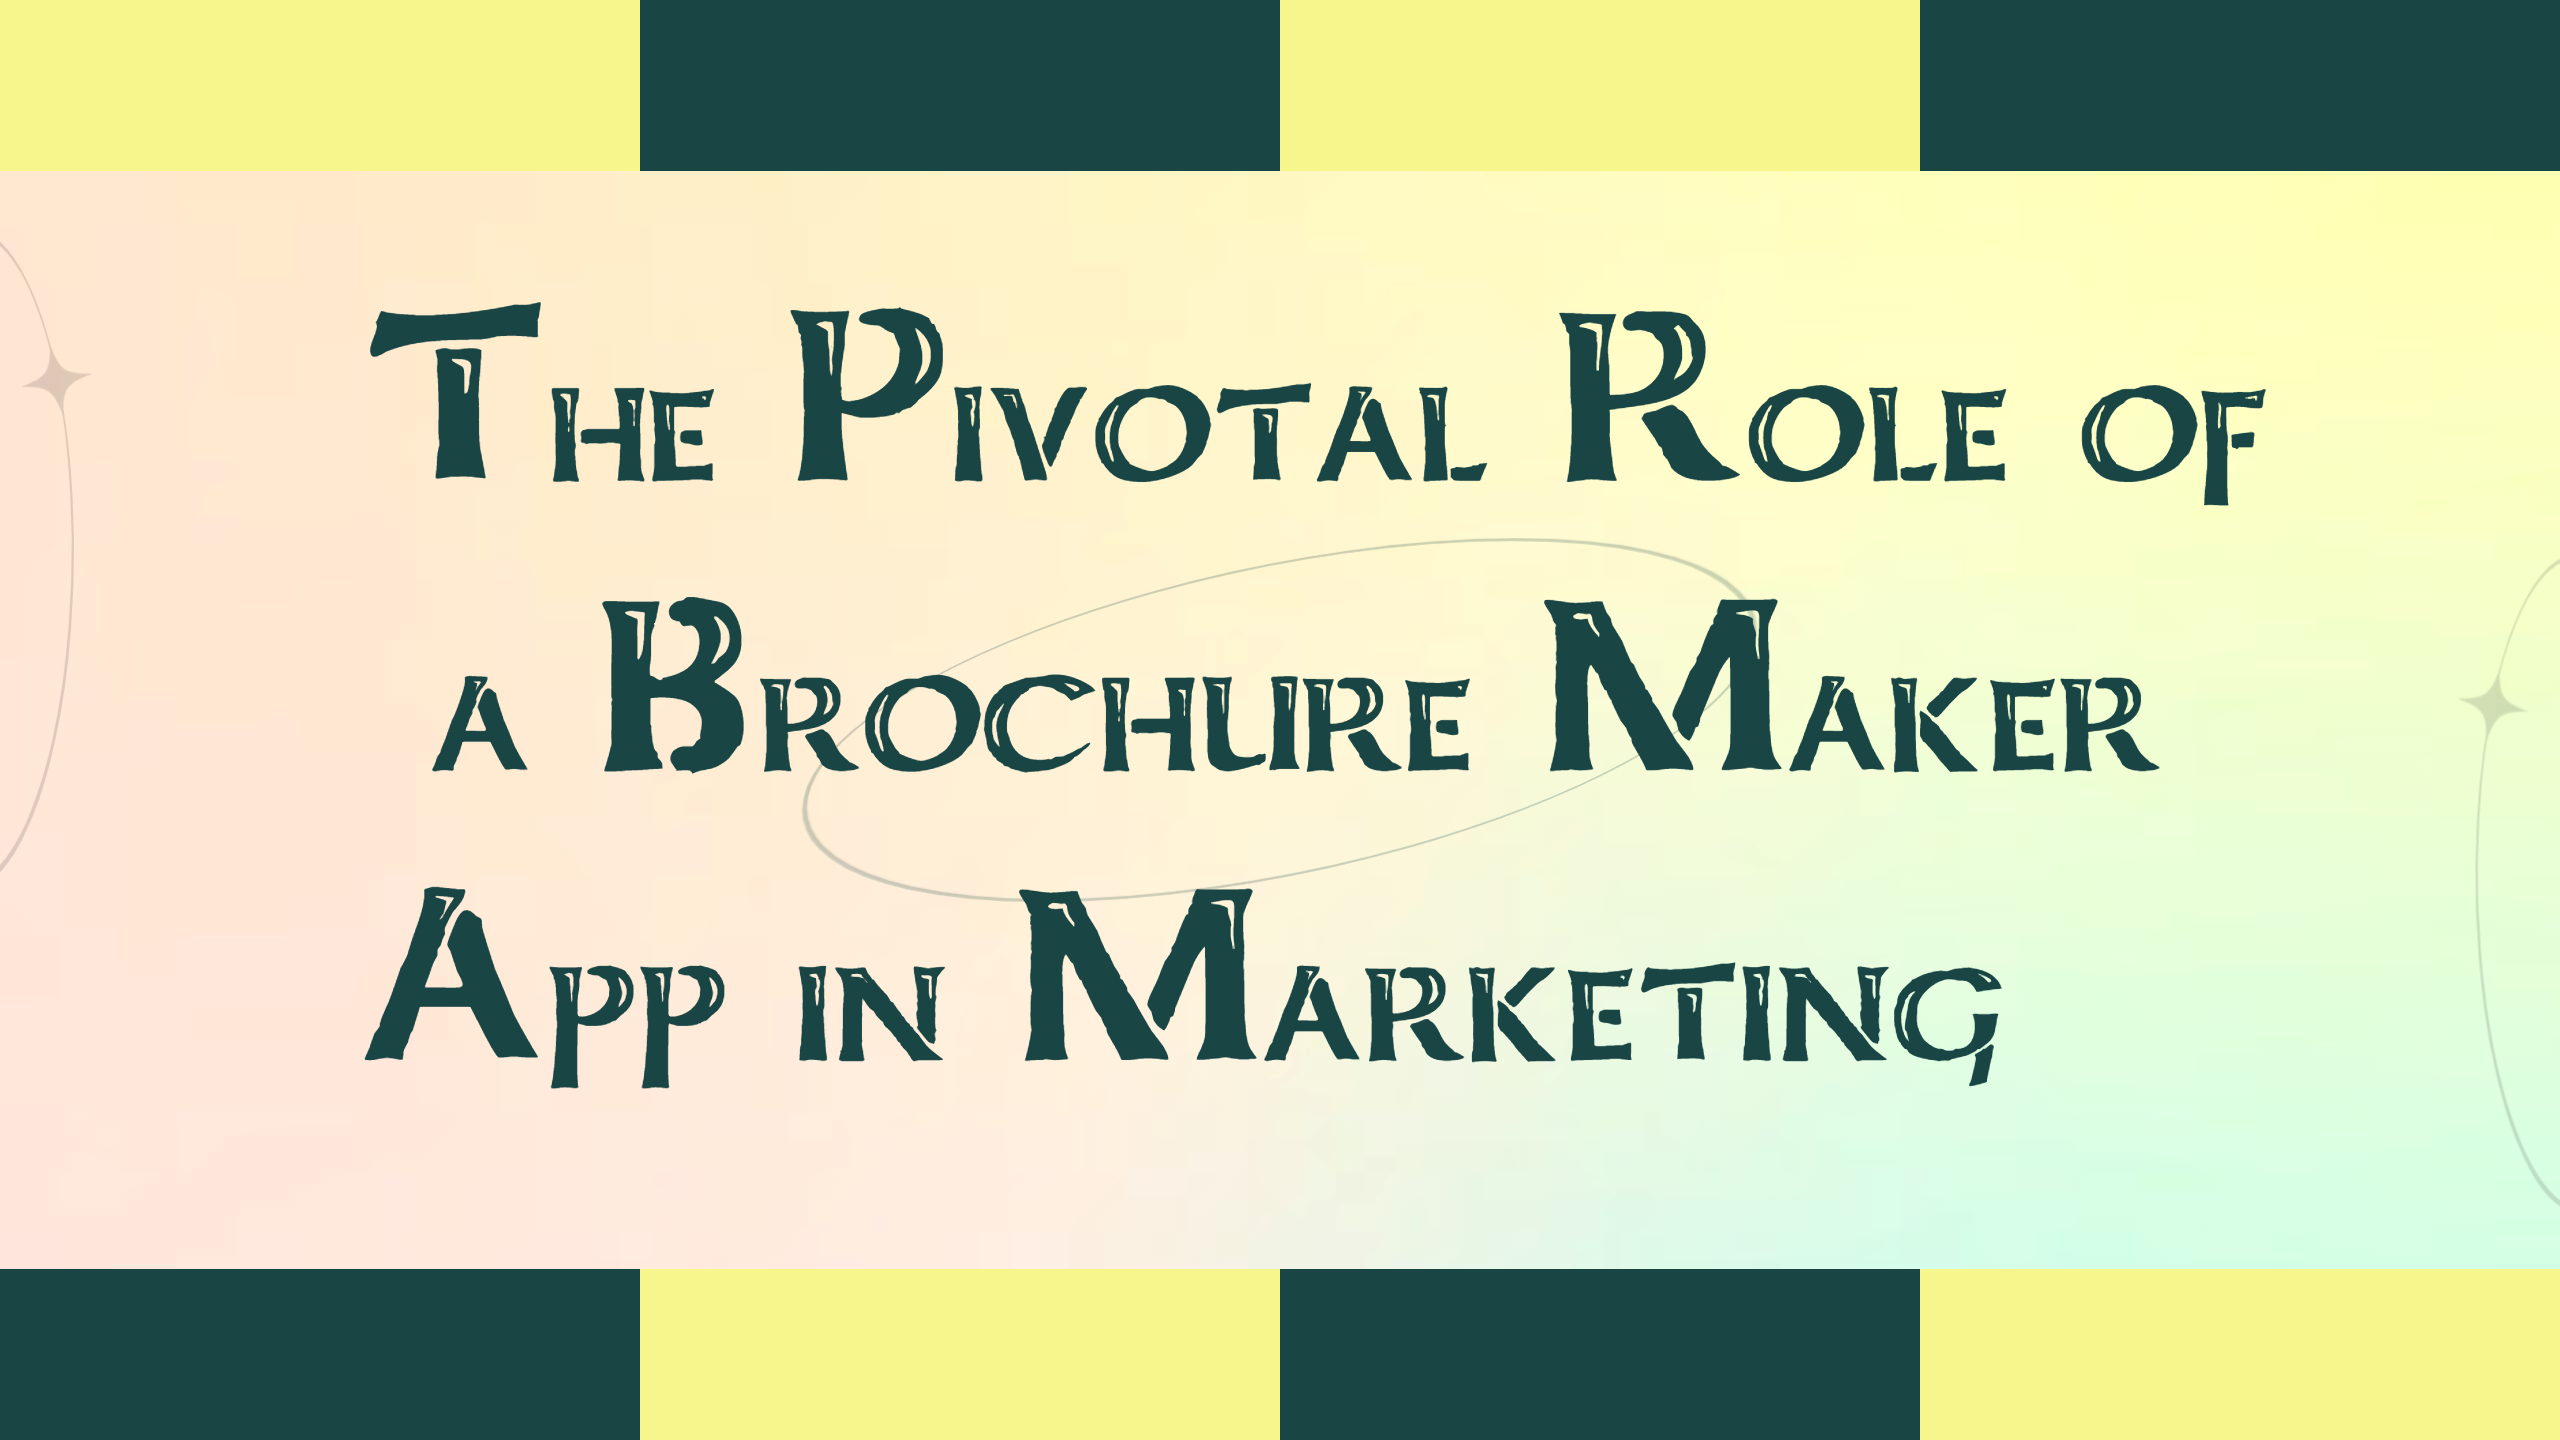 The Pivotal Role of a Brochure Maker App in Marketing